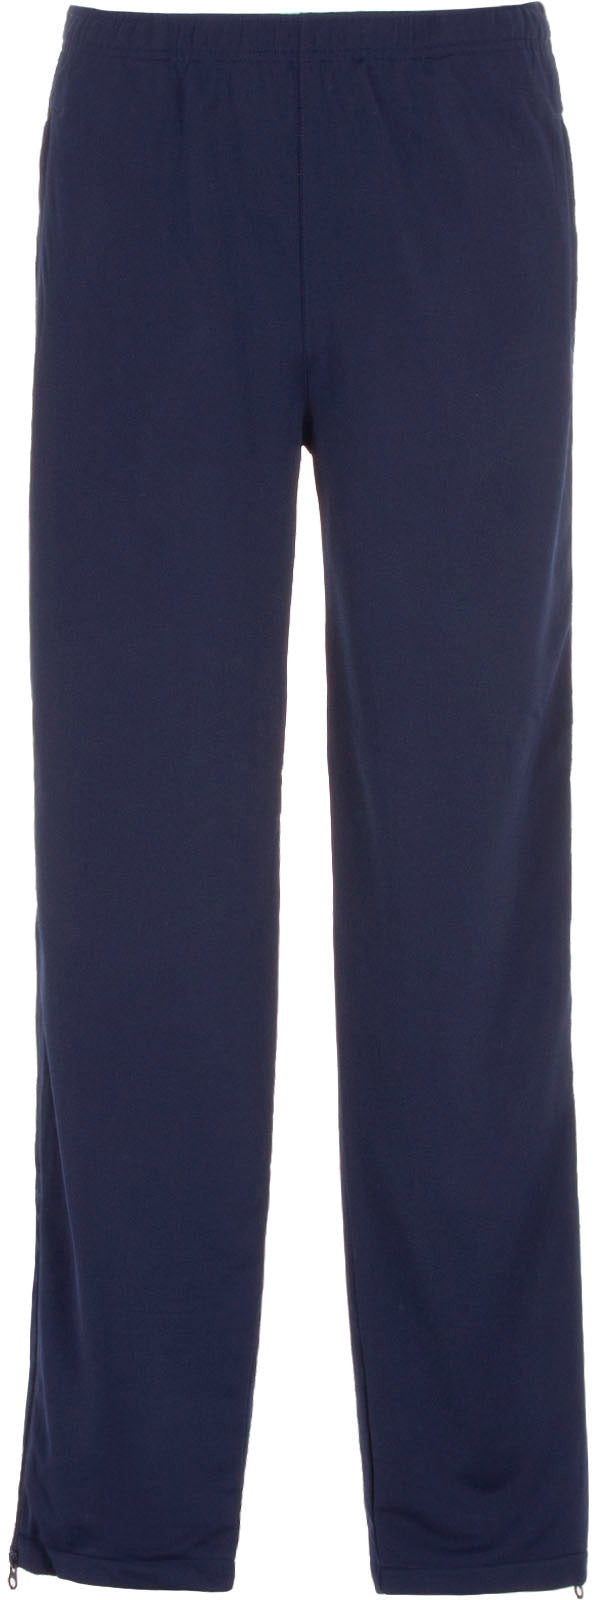 Training and leisure pants - zipper on the side